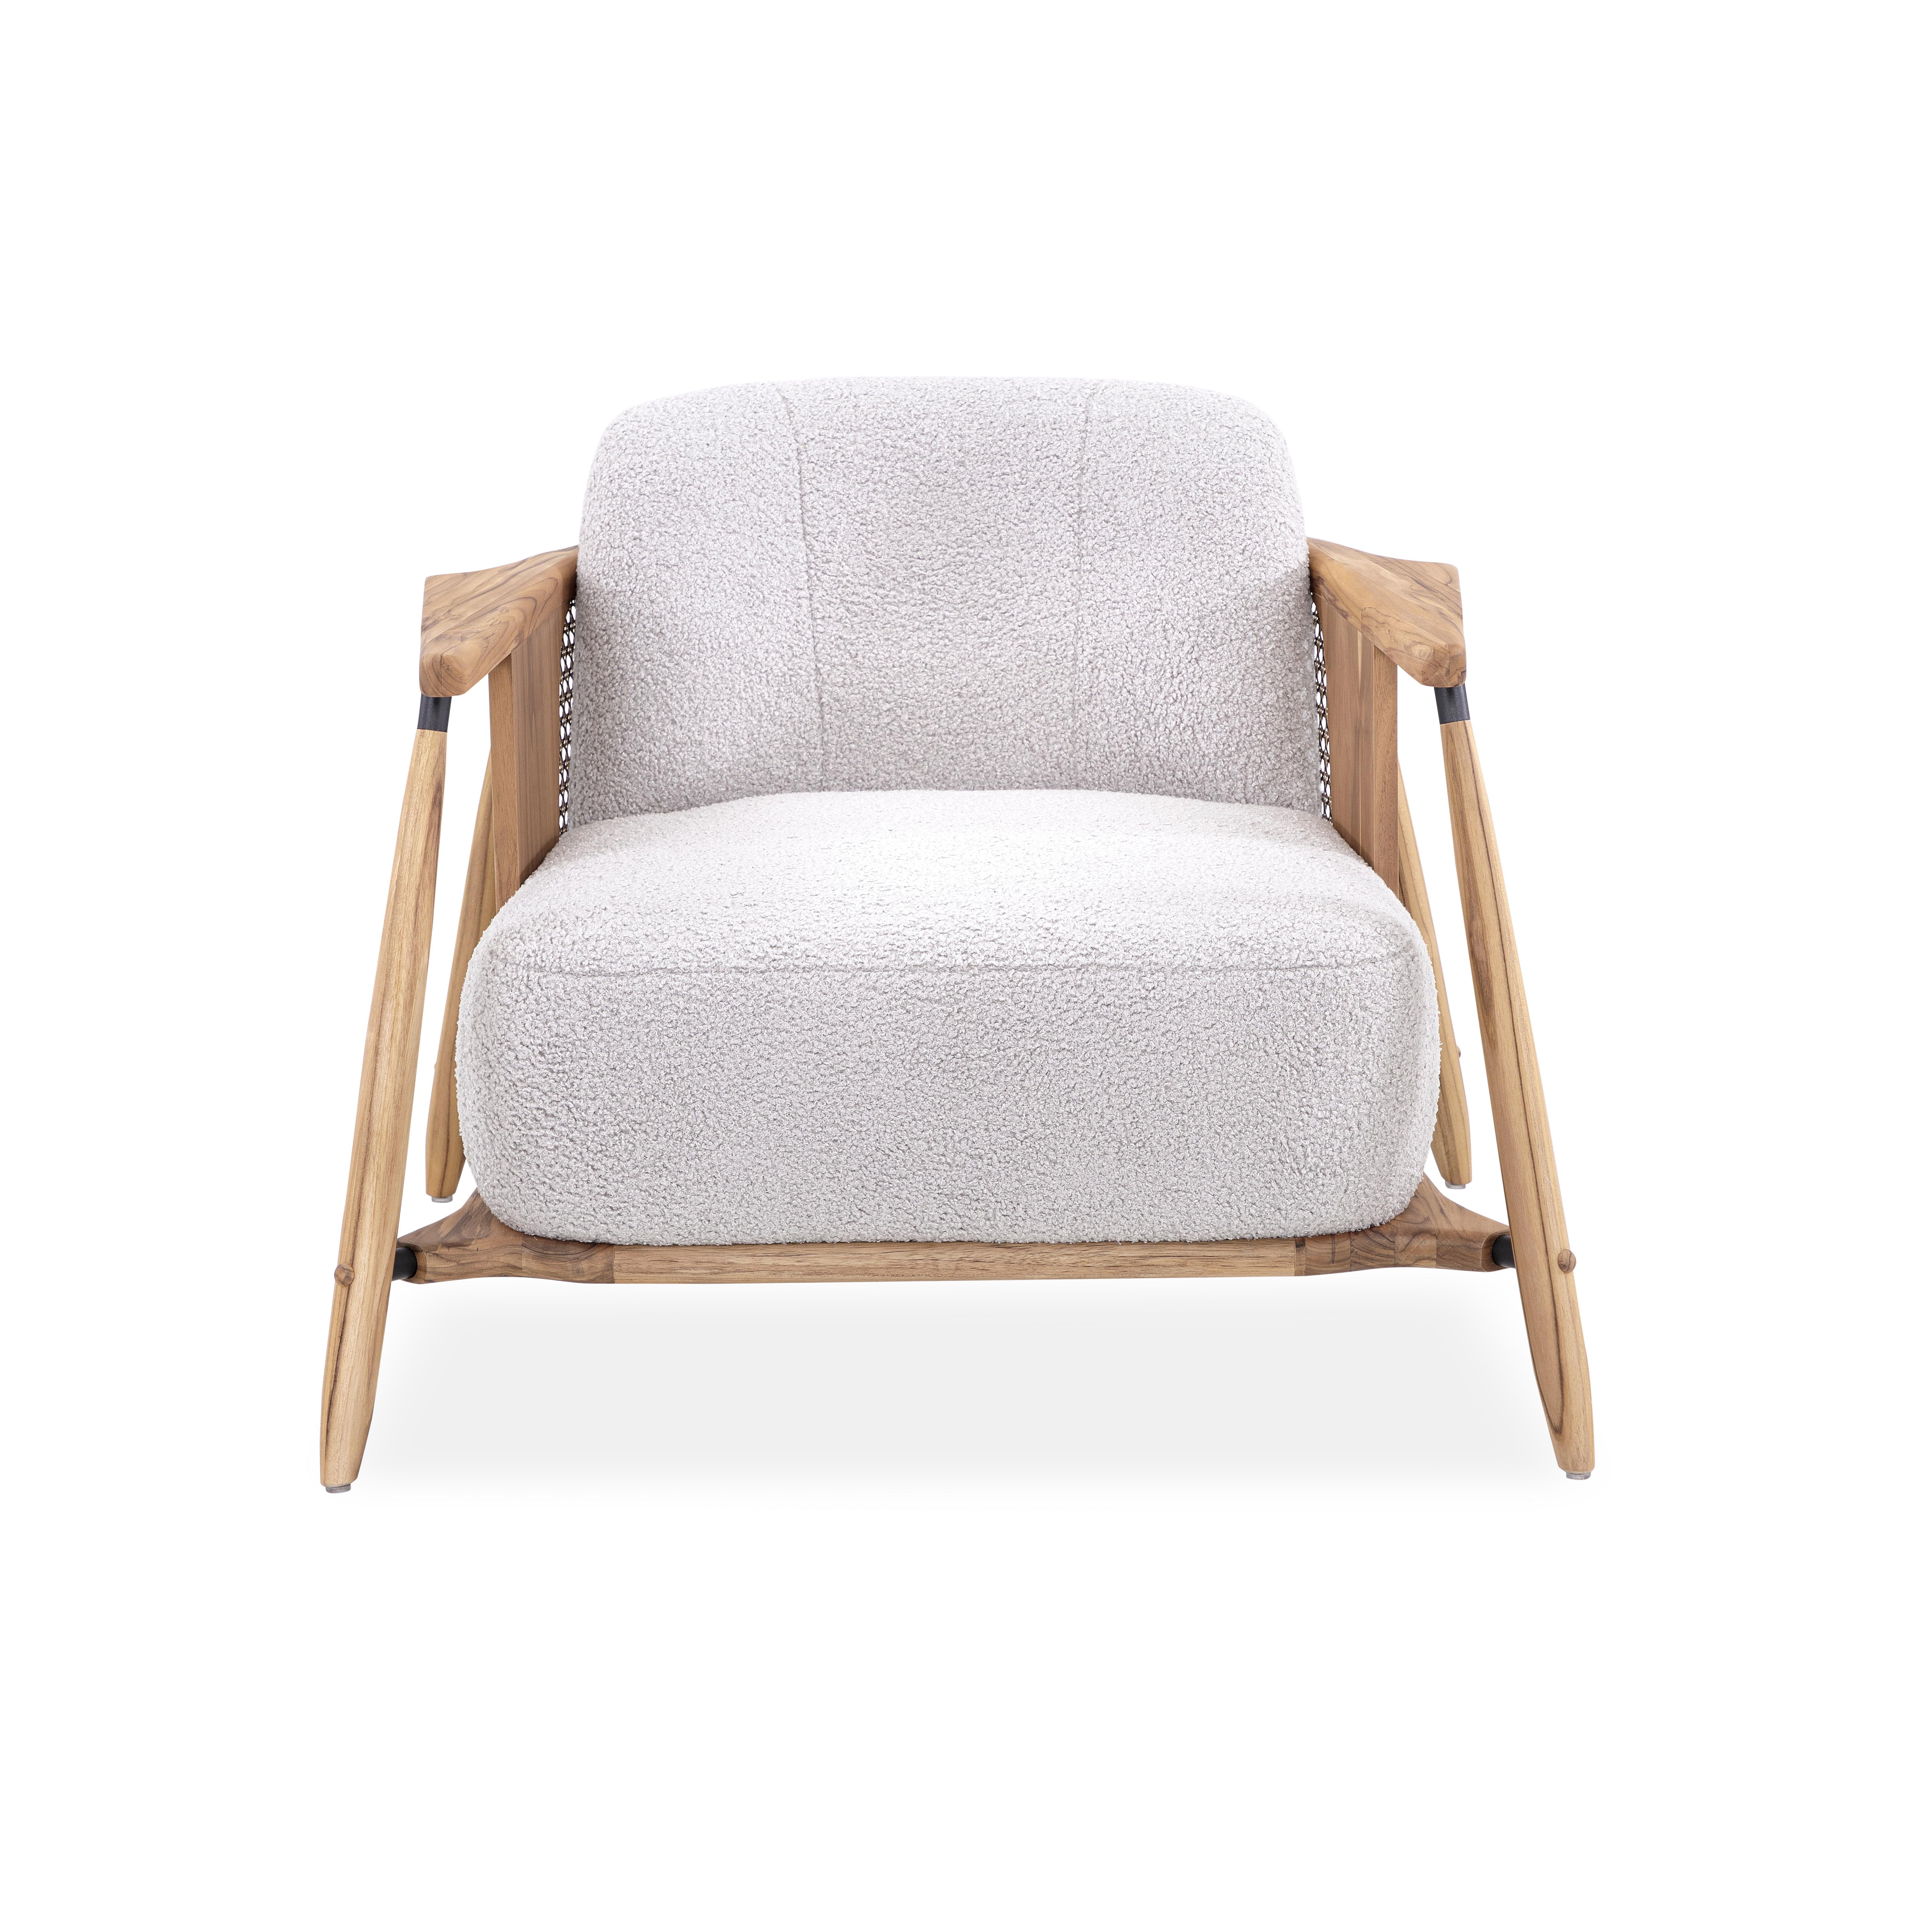 Laguna Occasional Chair in Light Gray Upholstered and Teak Wood Frame 5